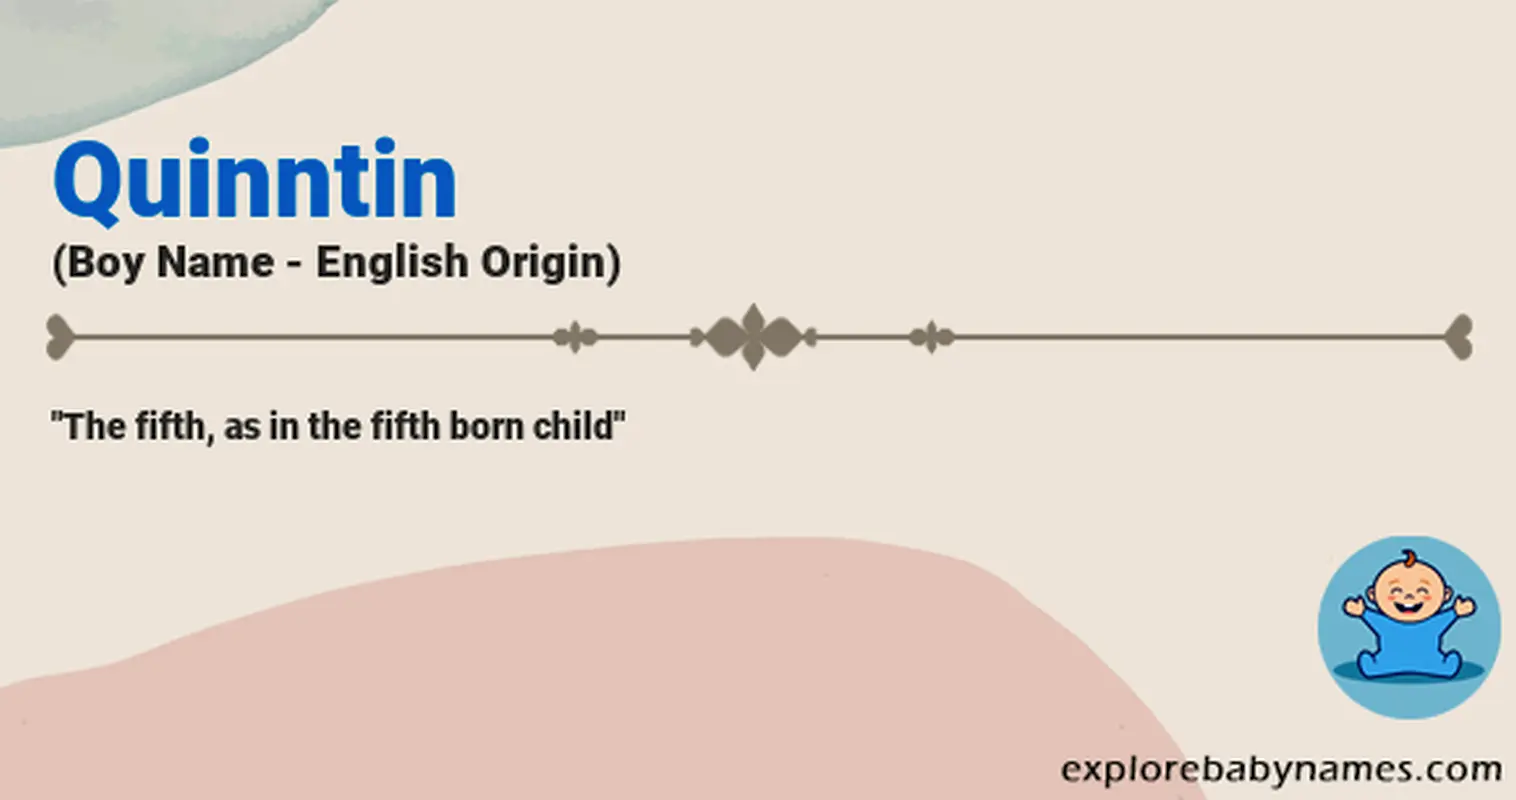 Meaning of Quinntin